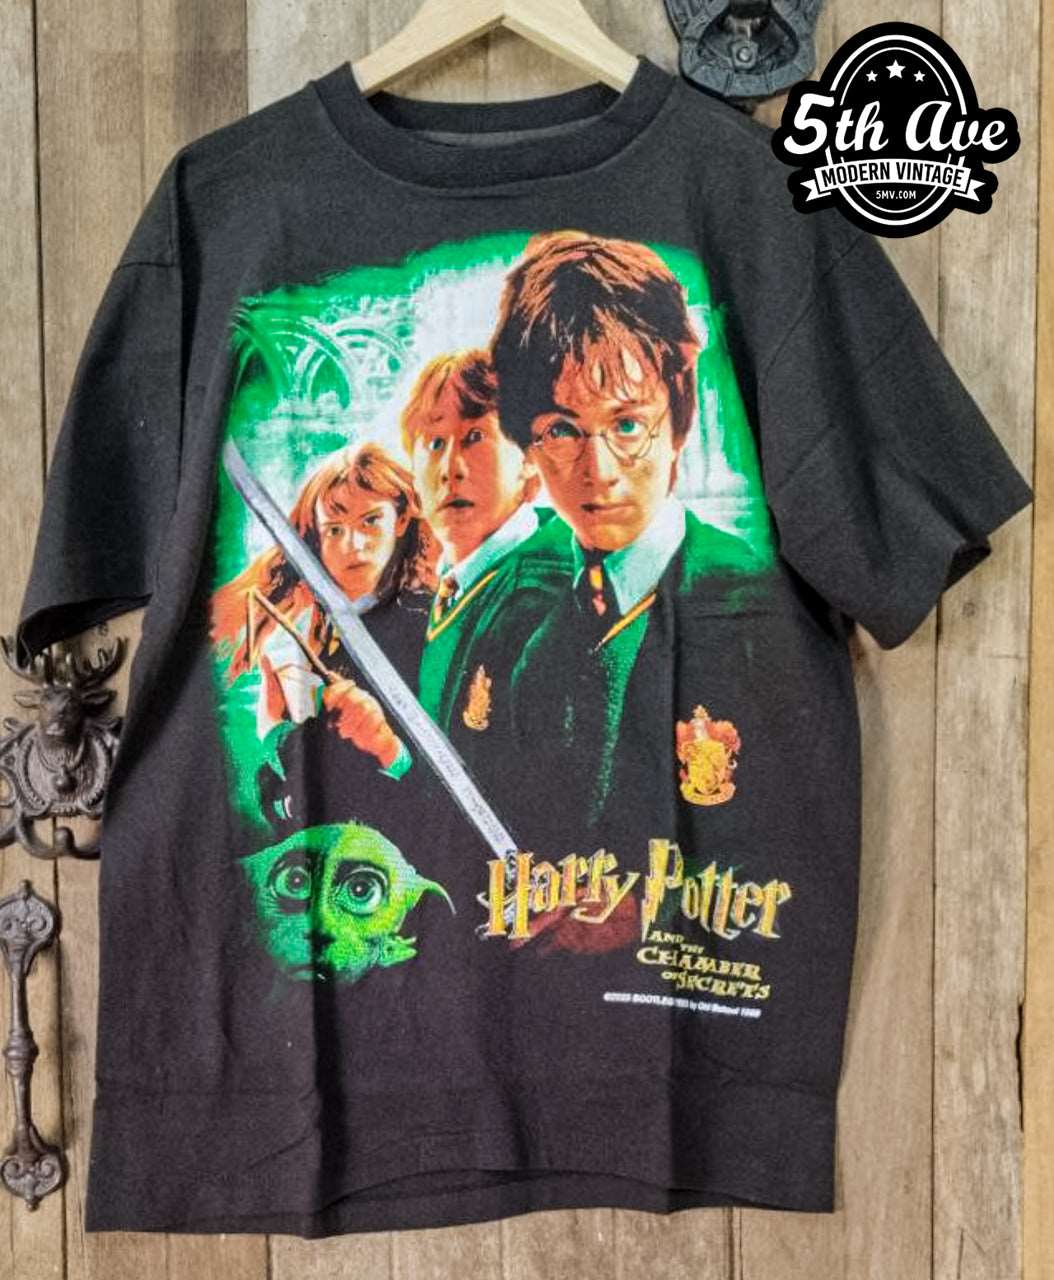 Harry Potter and the Chamber of Secrets - New Vintage Movie T